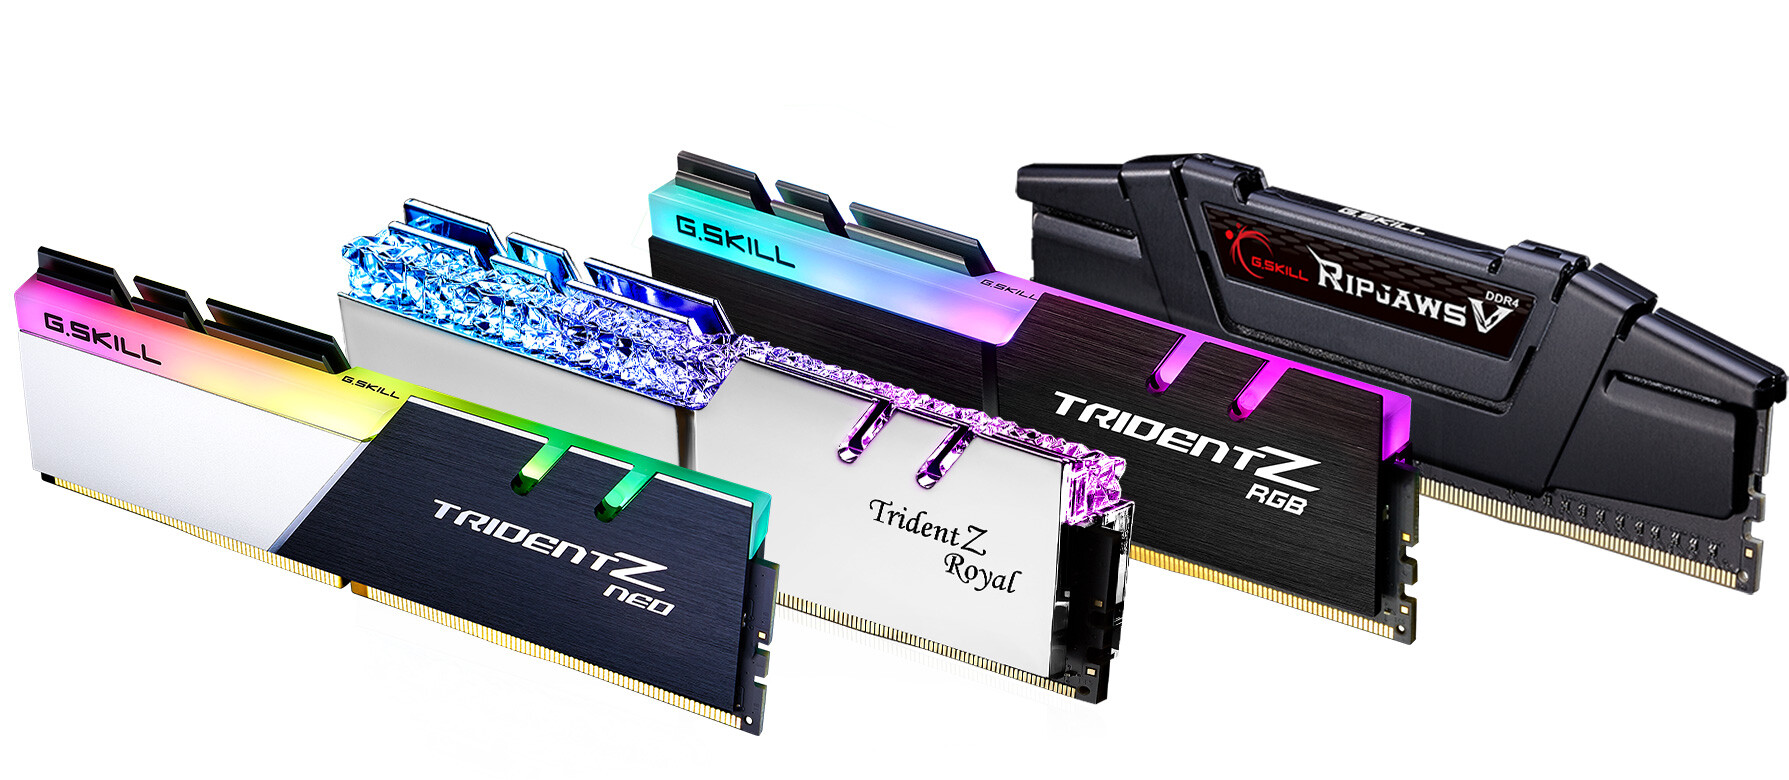 Uredelighed ejendom Hvem G.Skill Announces Extreme Low Latency DDR4-3600 CL14 64GB Memory Kit |  TechPowerUp